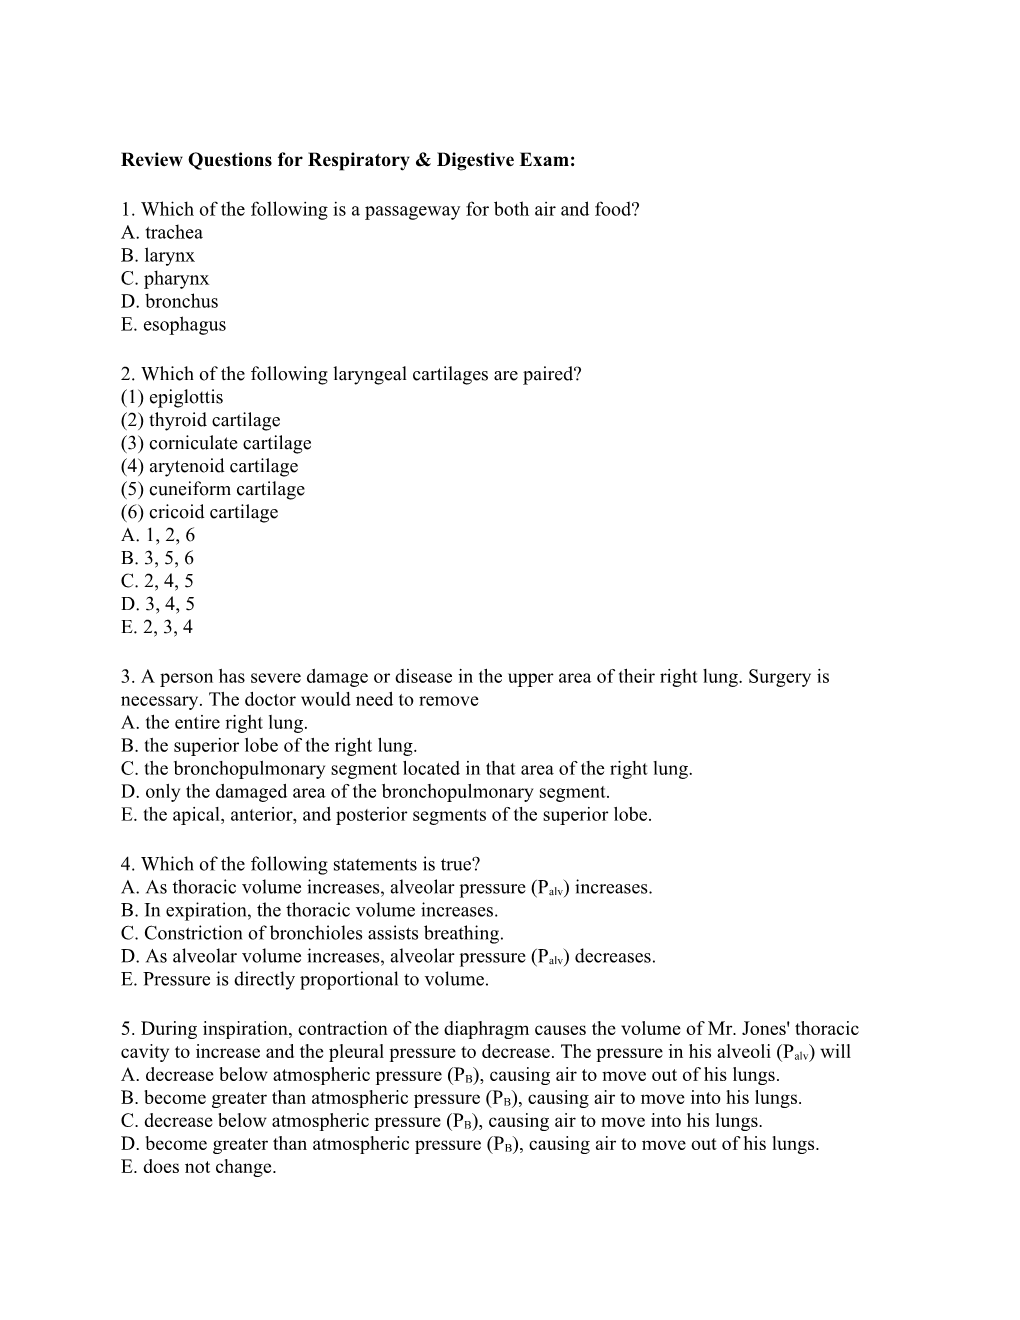 Review Questions for Respiratory & Digestive Exam